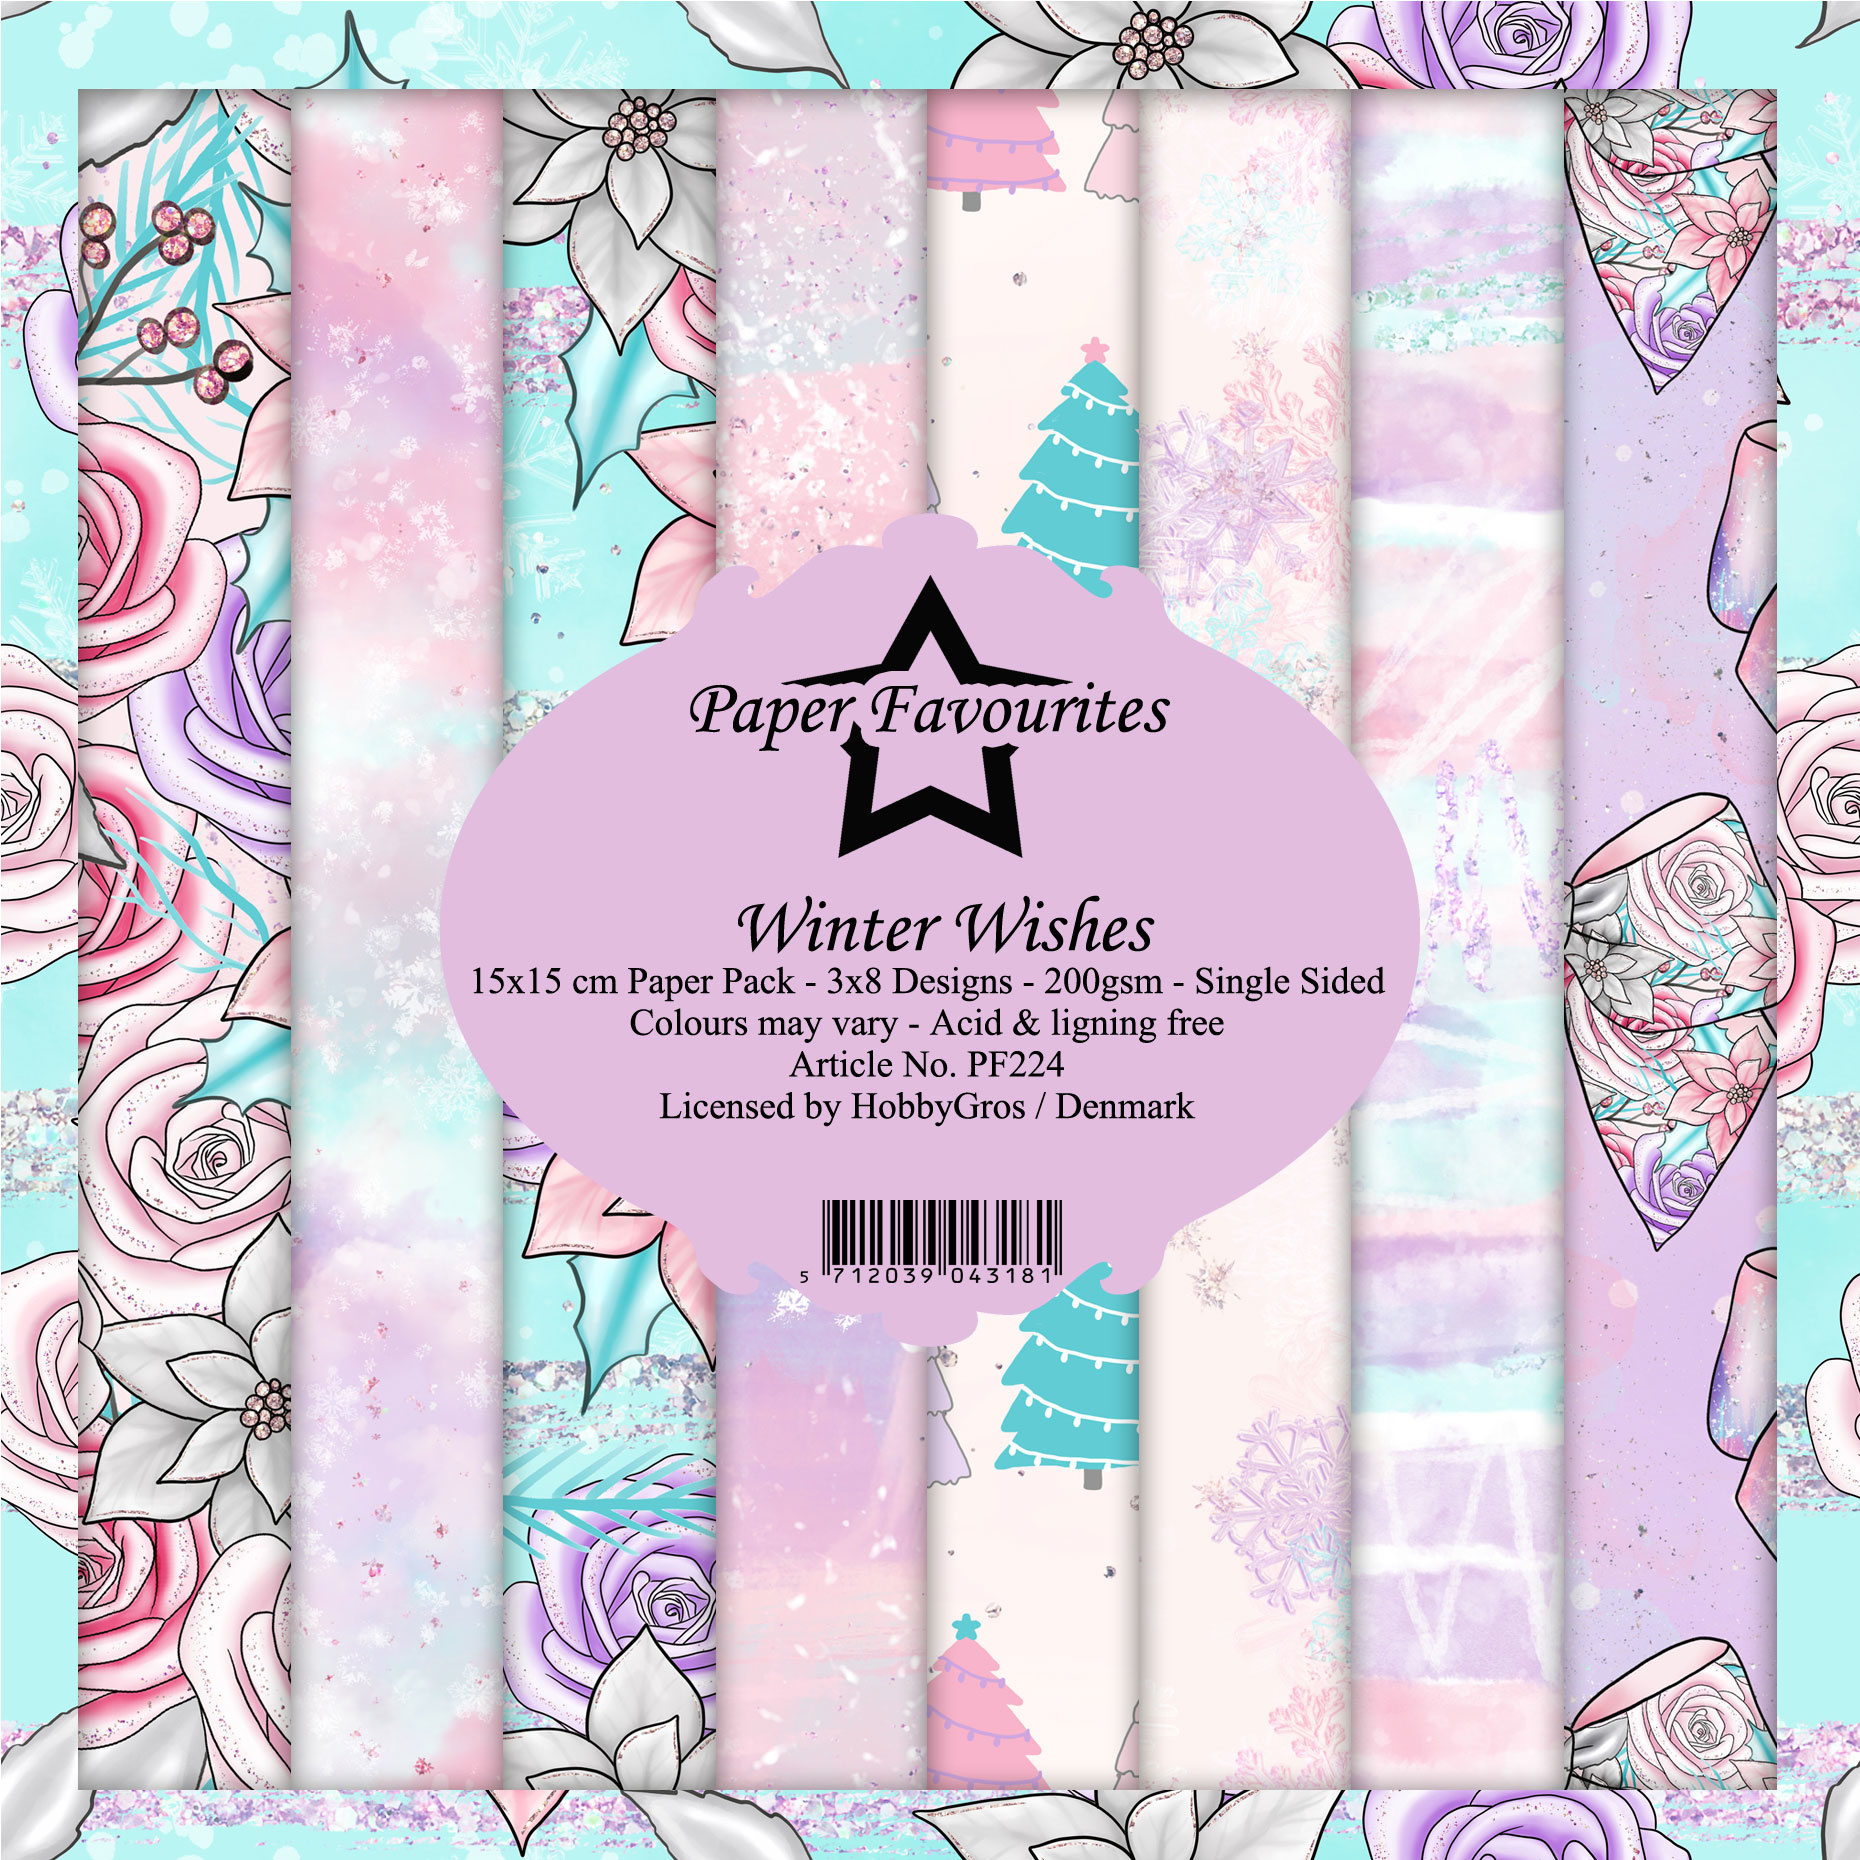 winter-wishes-6x6-inch-paper-pack-pf224-craftlines-b-v